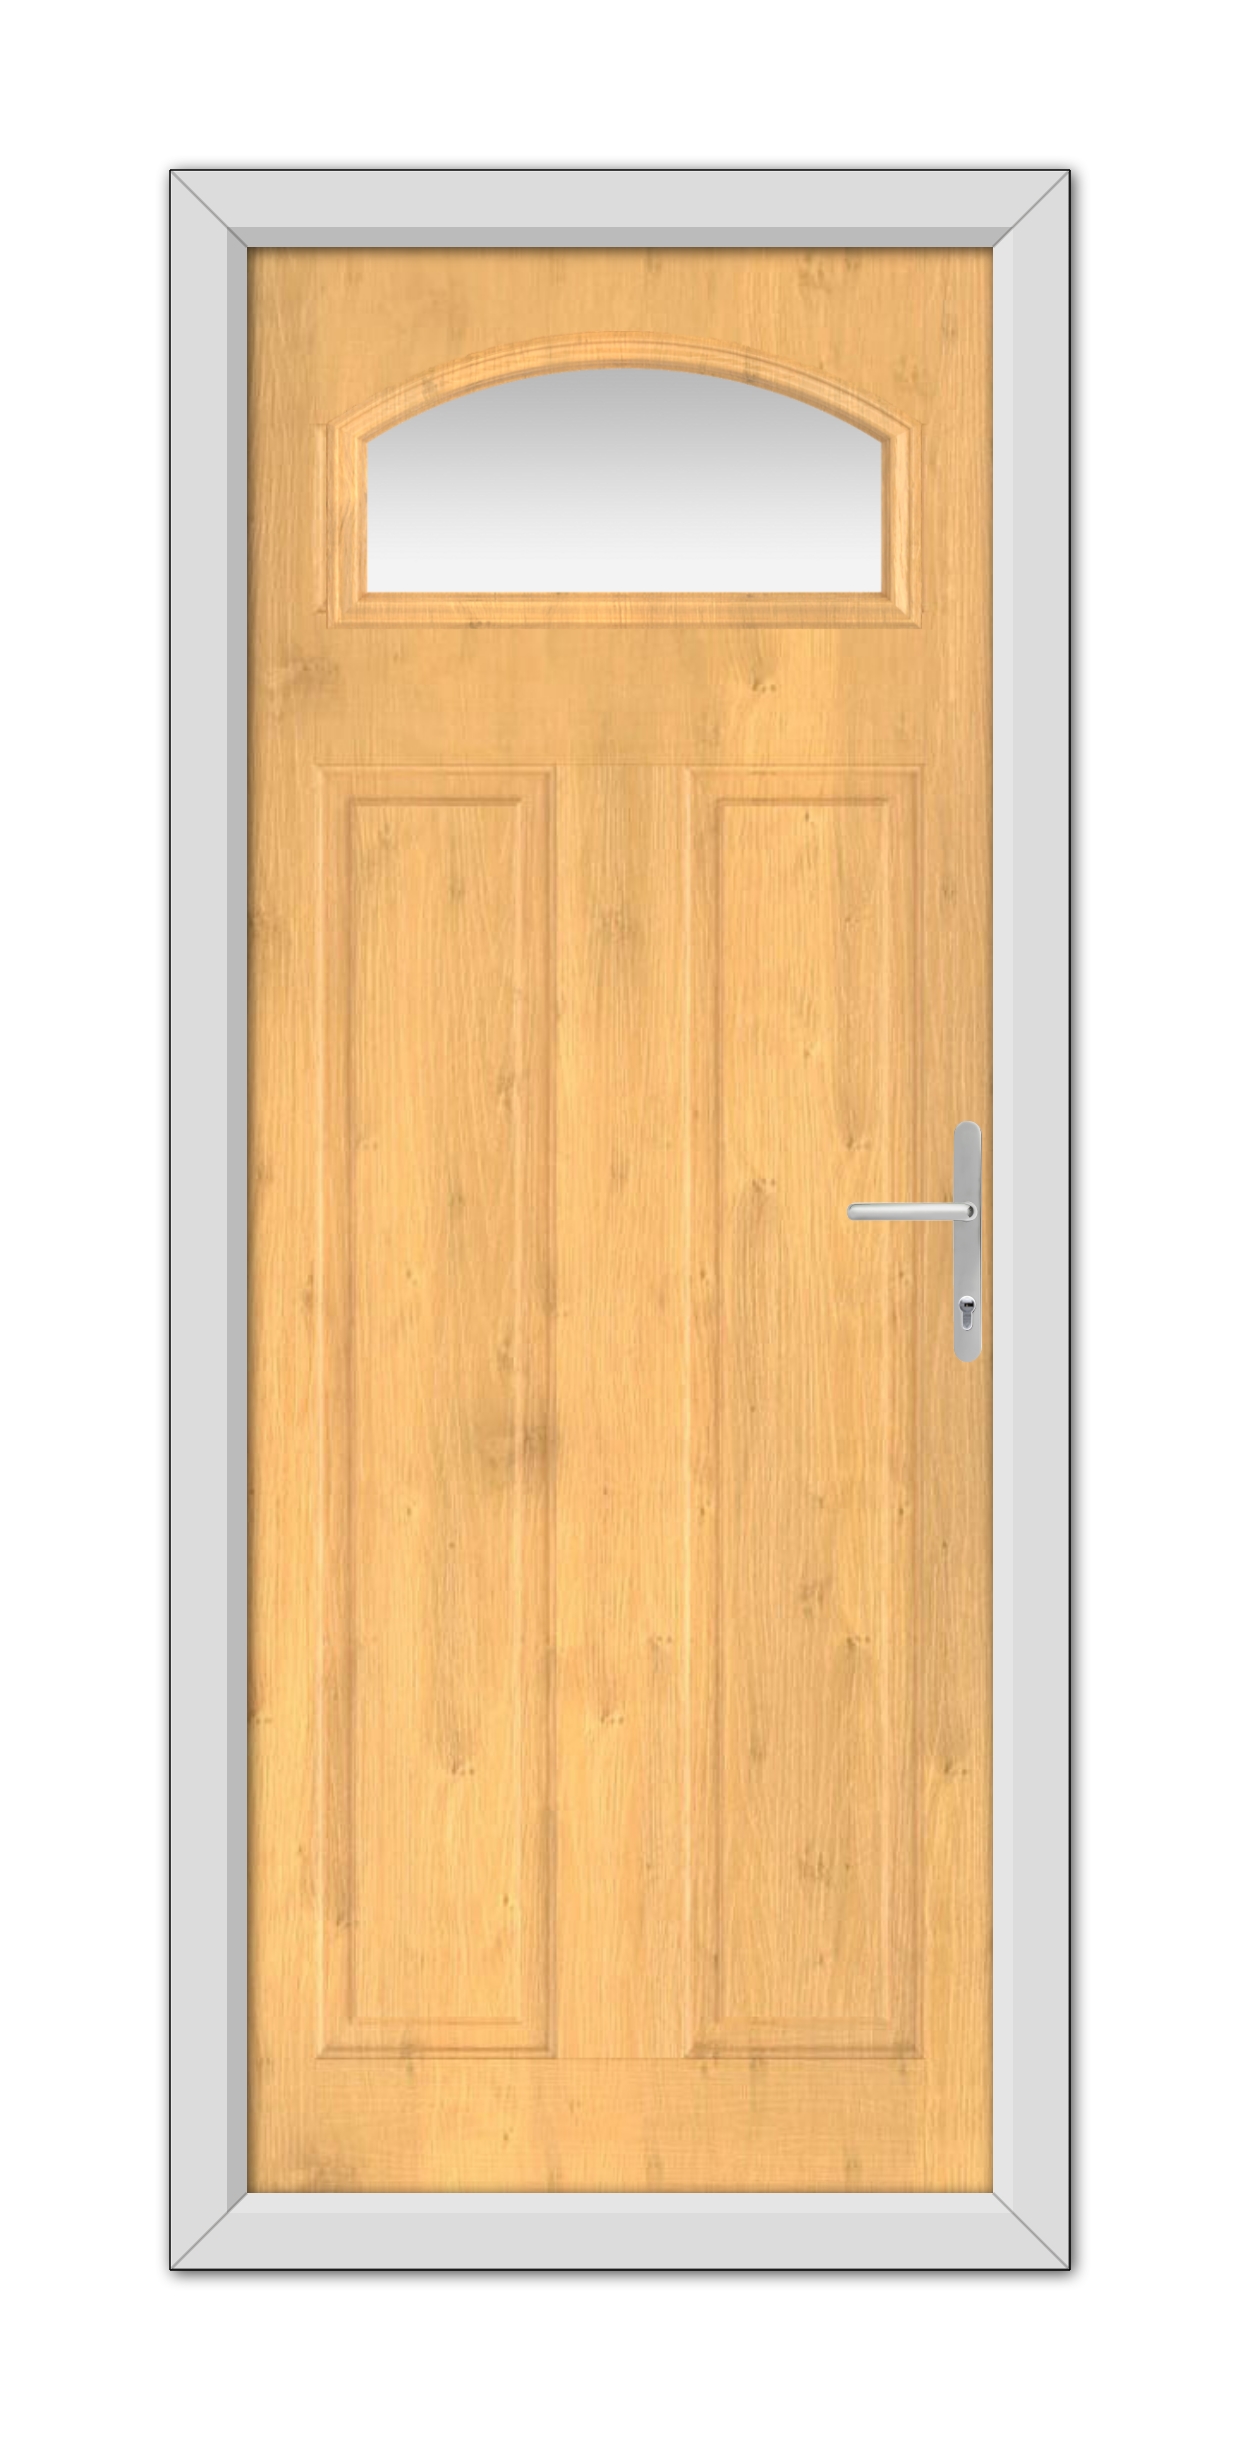 An Irish Oak Harlington Composite Door 48mm Timber Core with a semicircular window at the top, framed in white, with a metal handle on the right side.